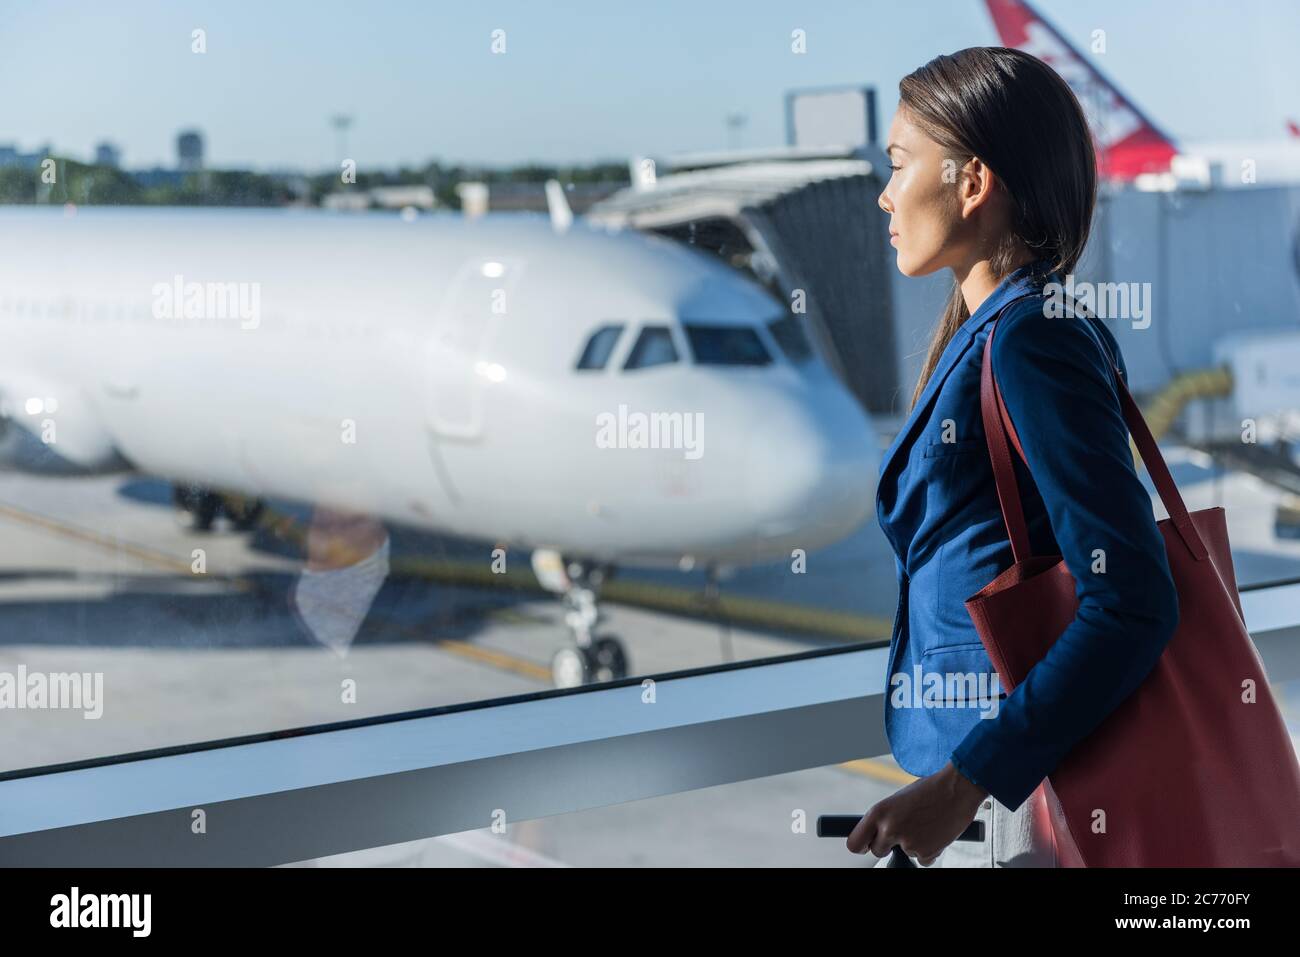 Woman looking at window in airport. Asian tourist relaxing looking at airplanes while waiting at boarding gate before departure. Travel lifestyle Stock Photo